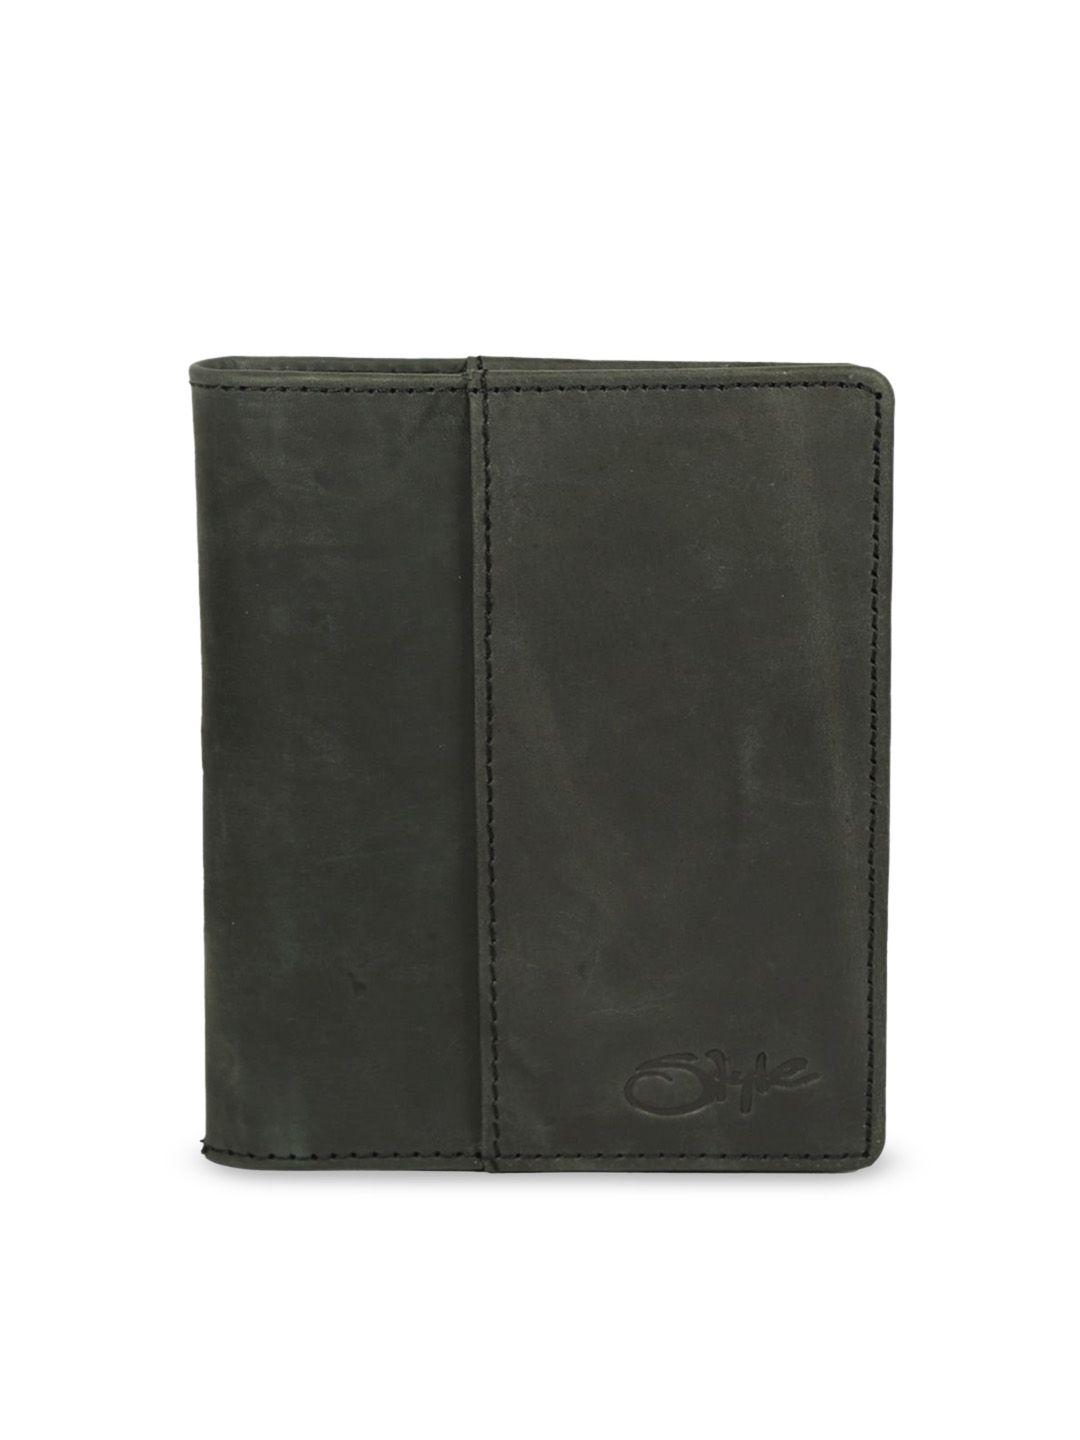 style shoes textured leather passport cover